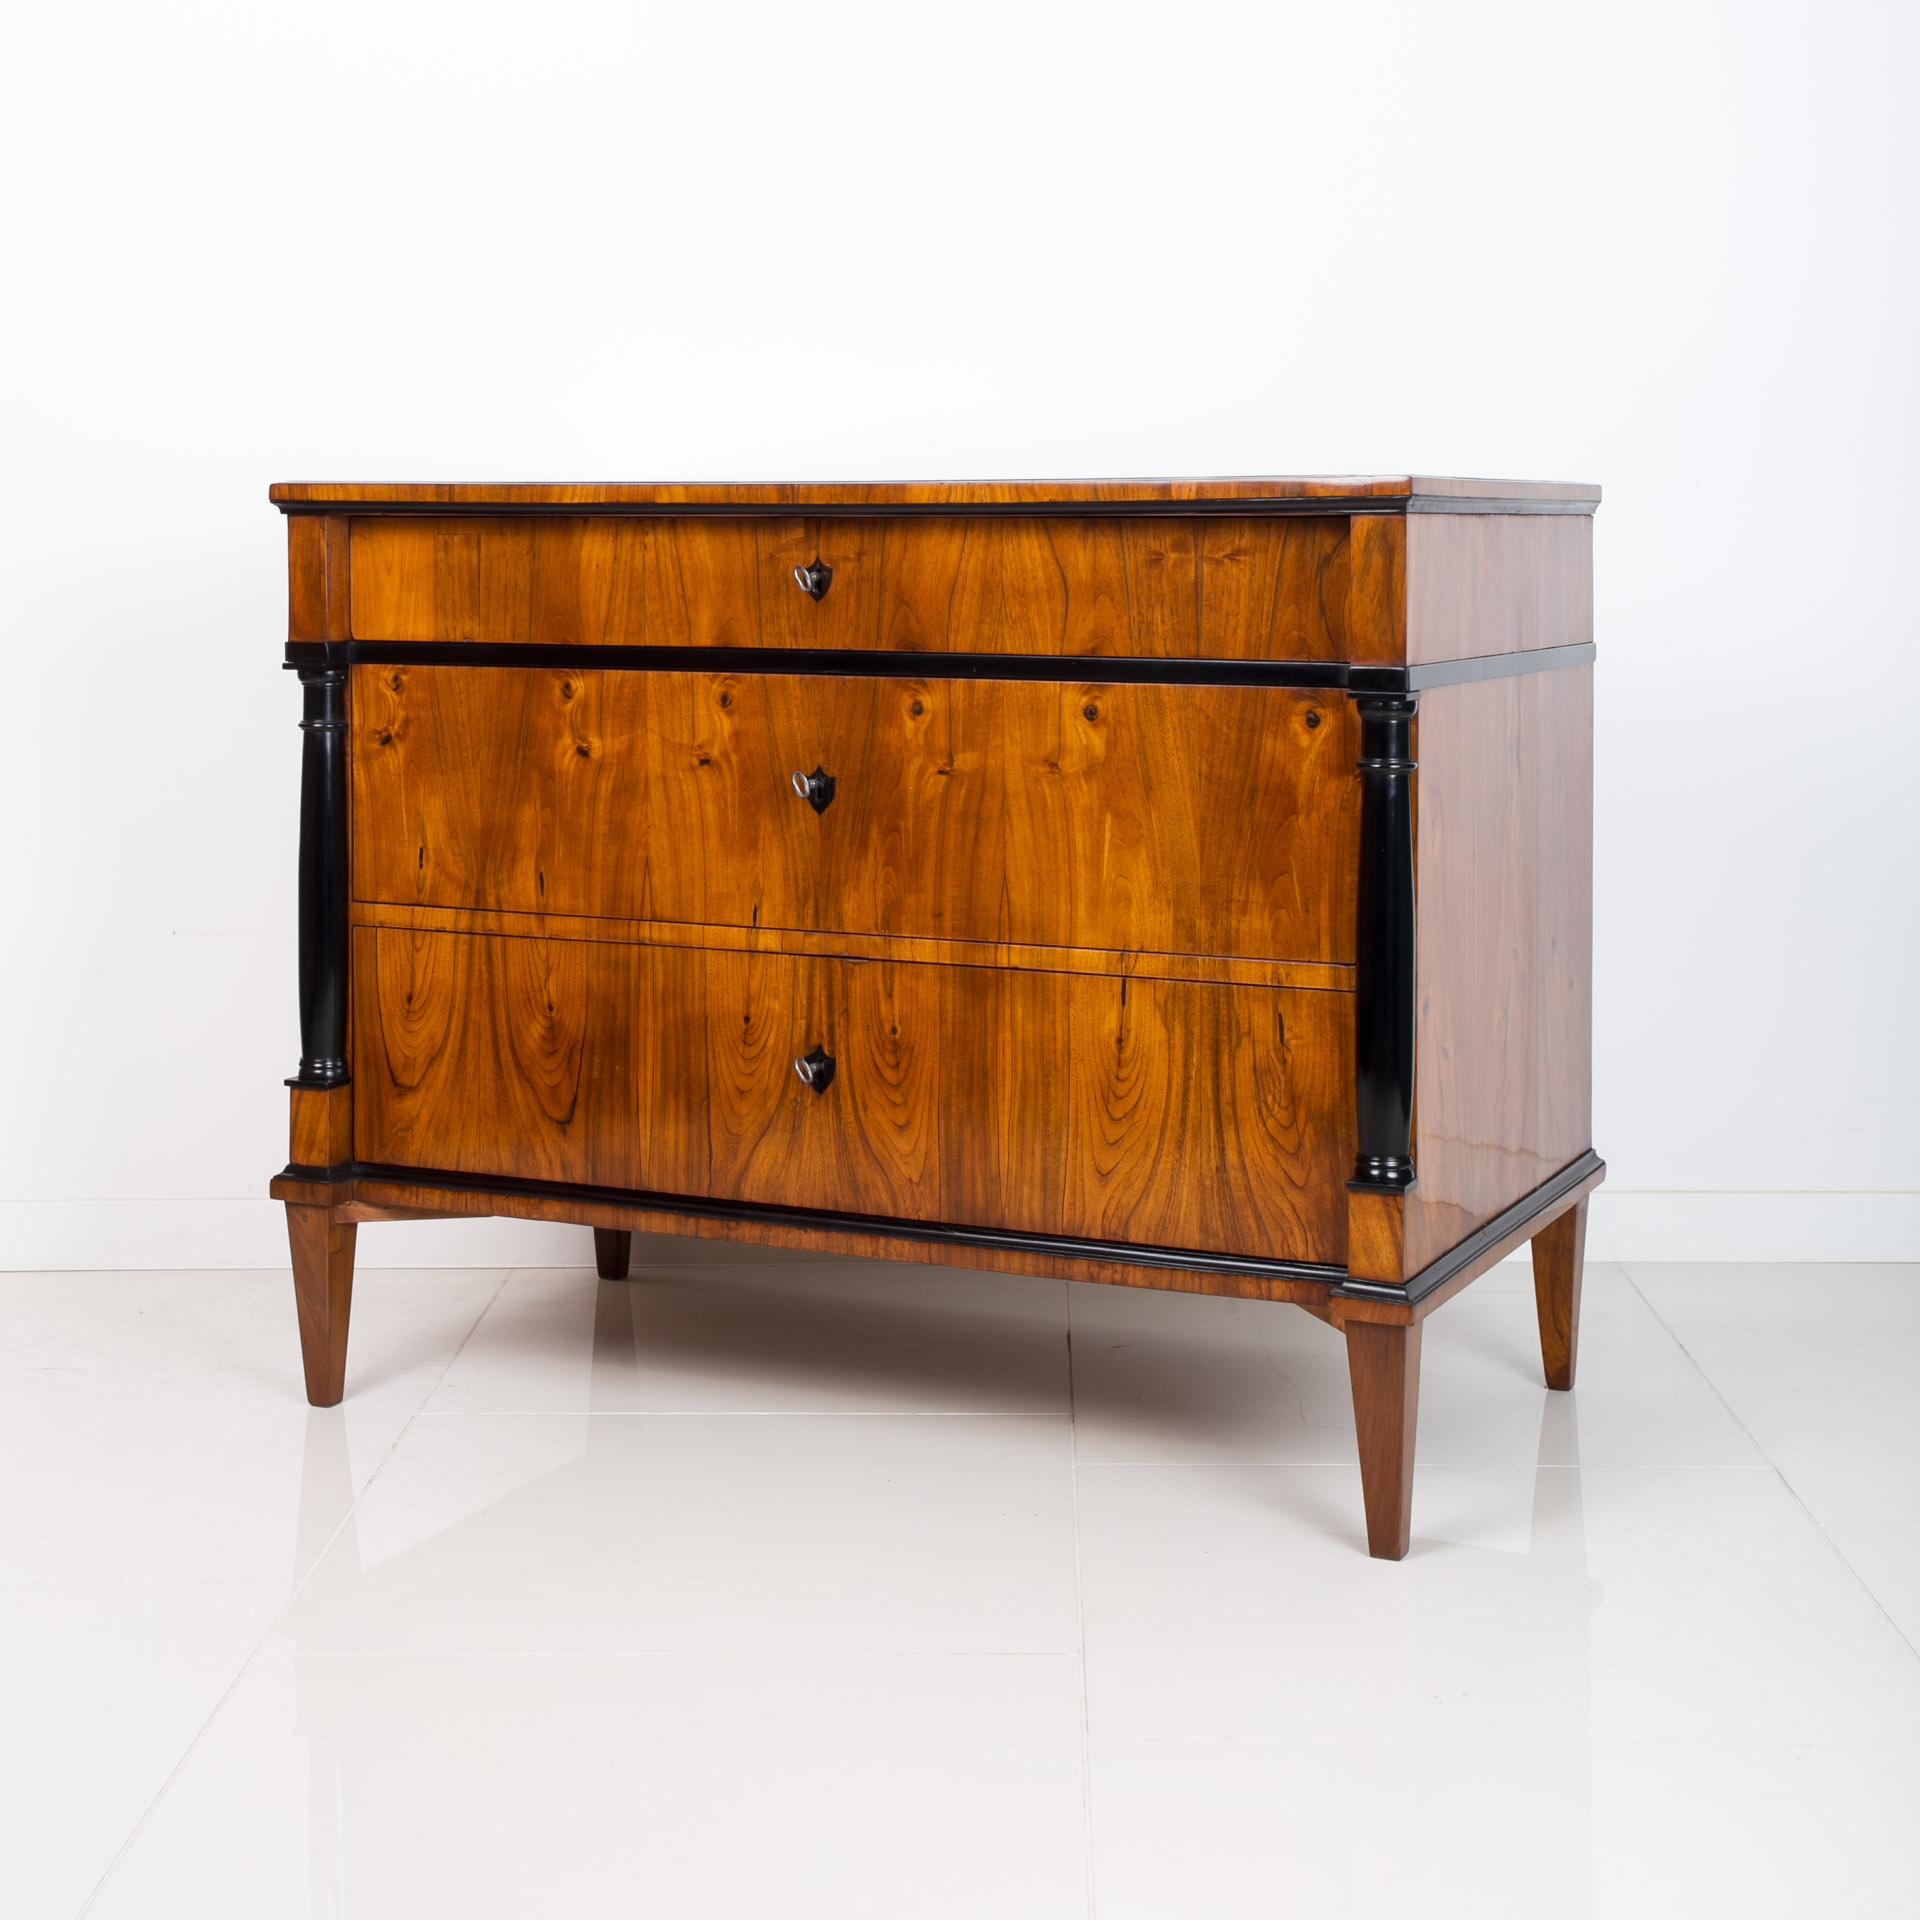 Biedermeier chest of drawers from first half of 19th century, approximately 1830 - 1850. This piece of furniture comes from Germany. It is veneered with beautiful walnut veneer. It has undergone a careful renovation process in our workshop and is in